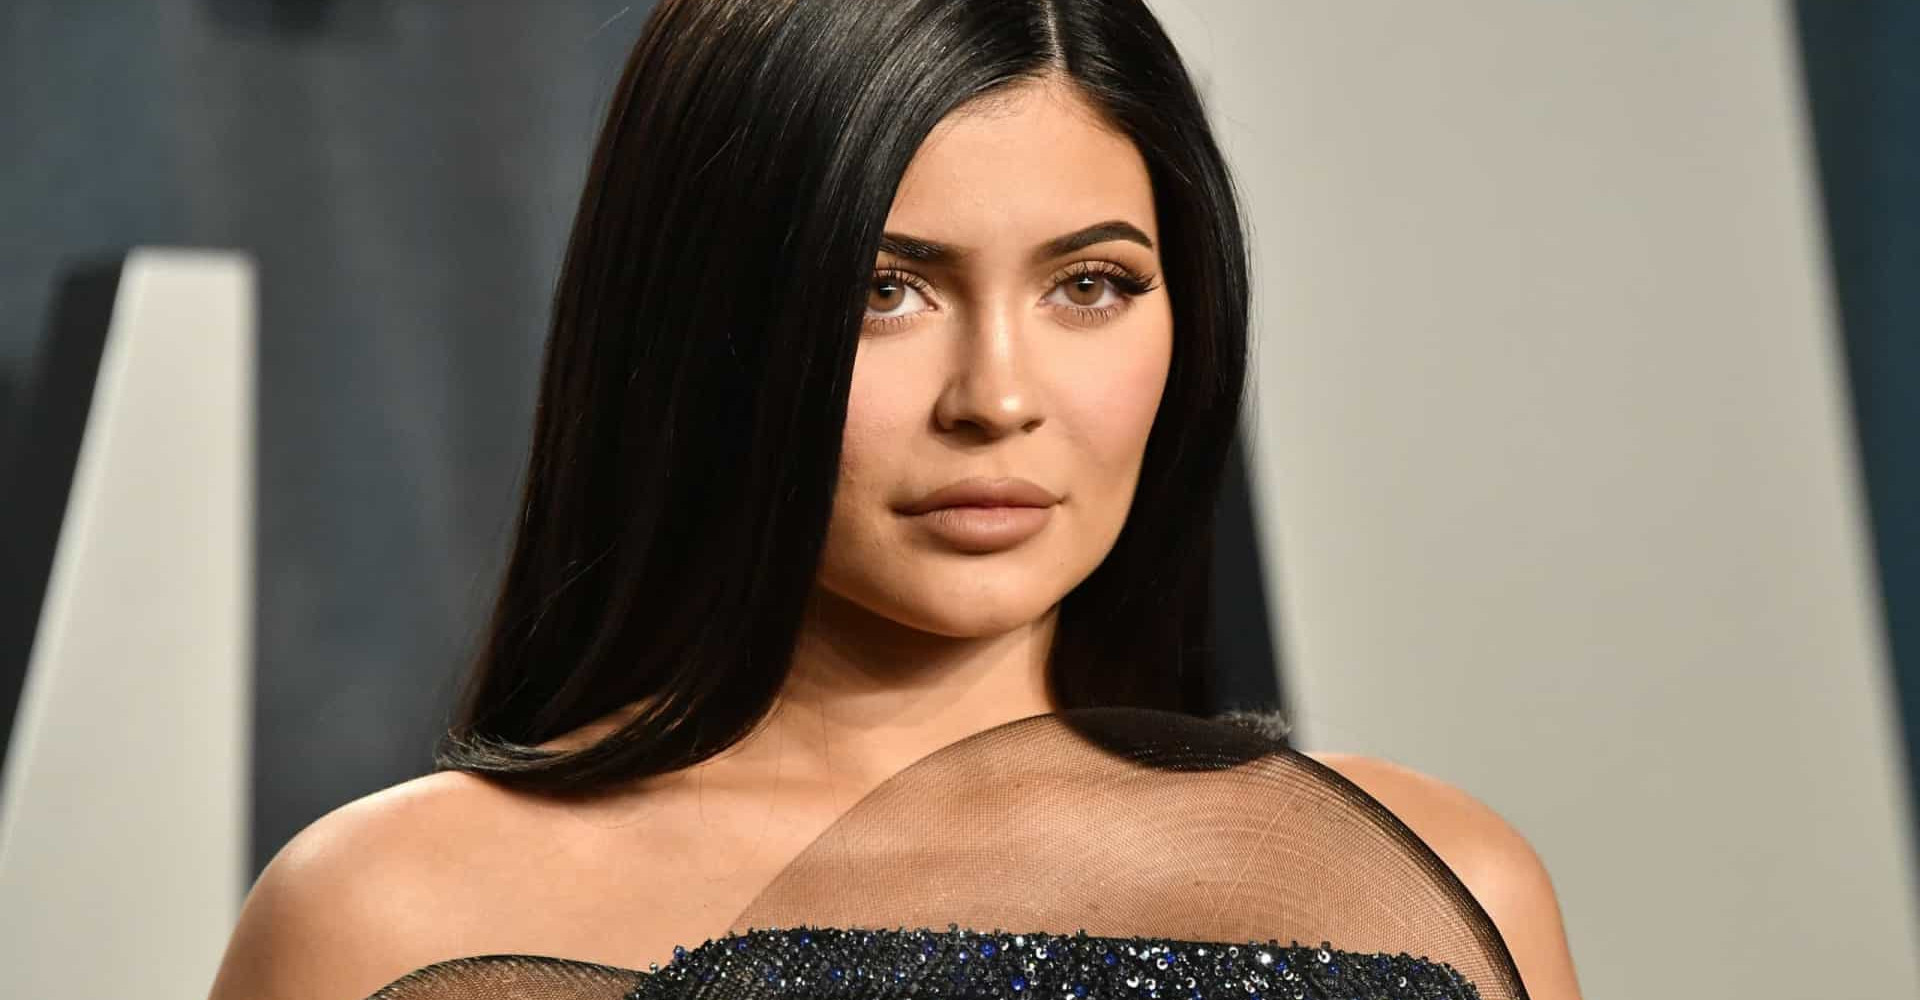 49 Facts About Kylie Jenner - Facts.Net